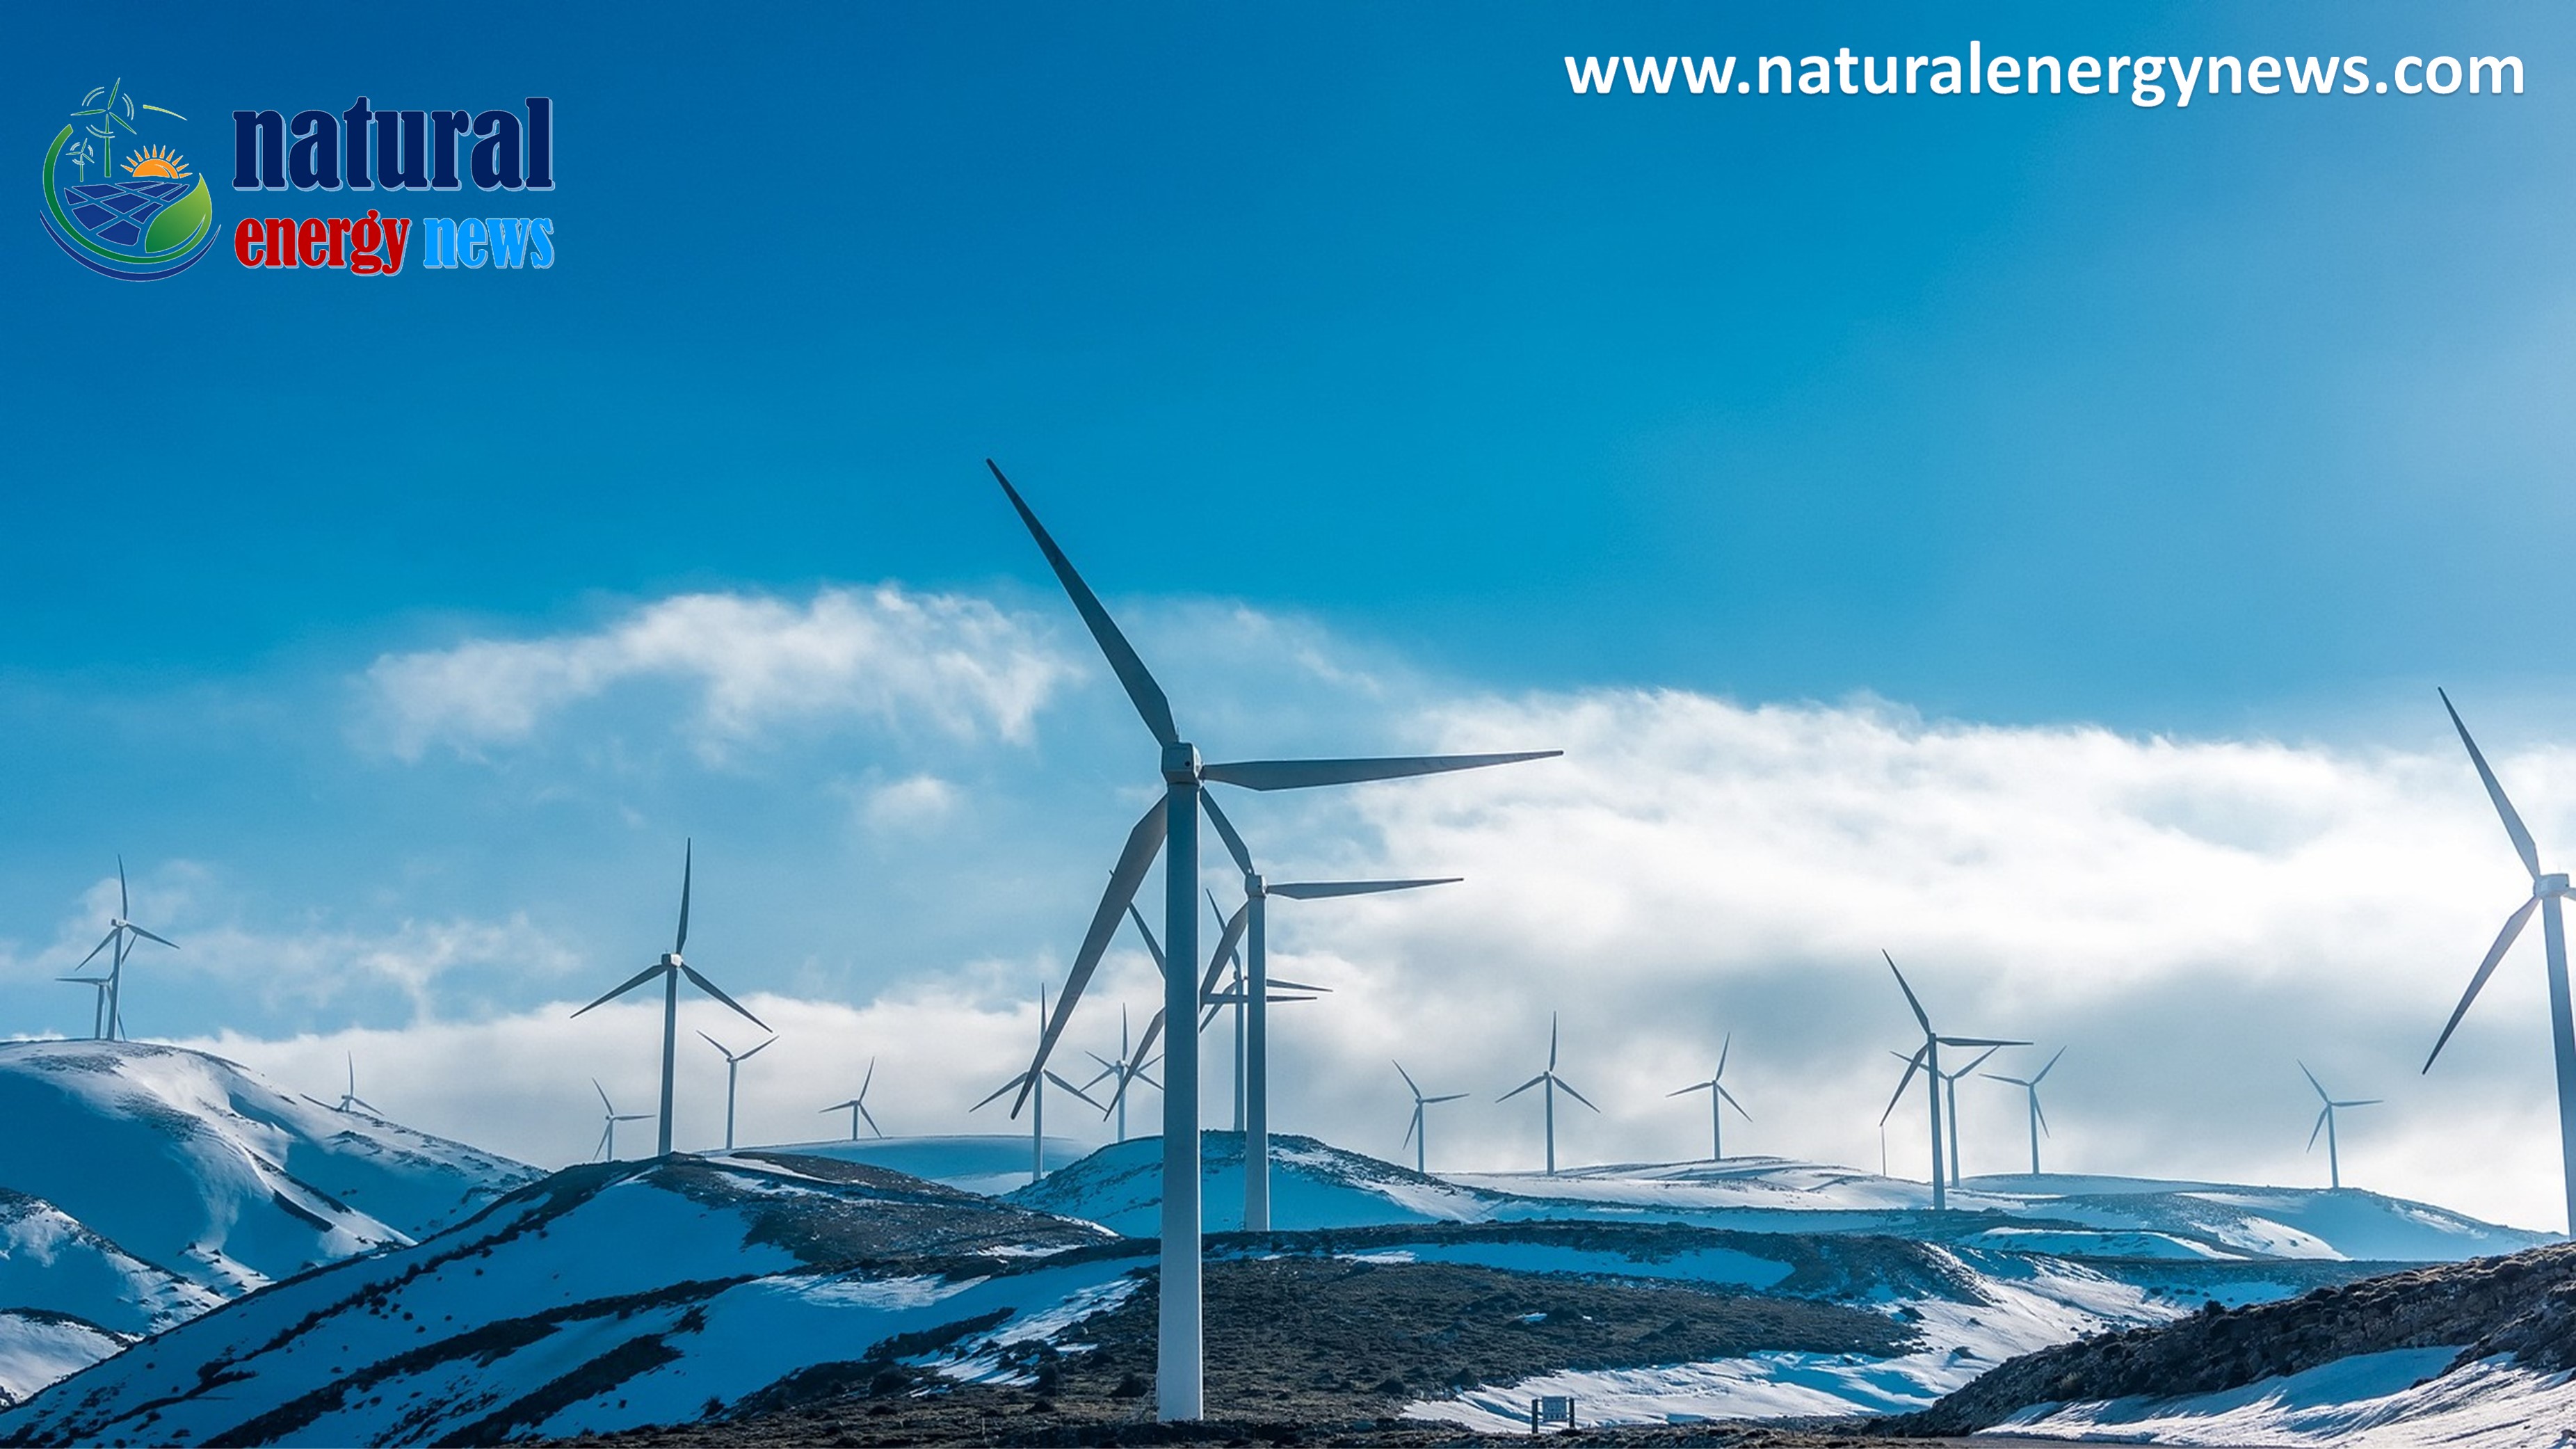 Natural Energy News; The Rising Costs of Renewable Energy: A Complex Challenge